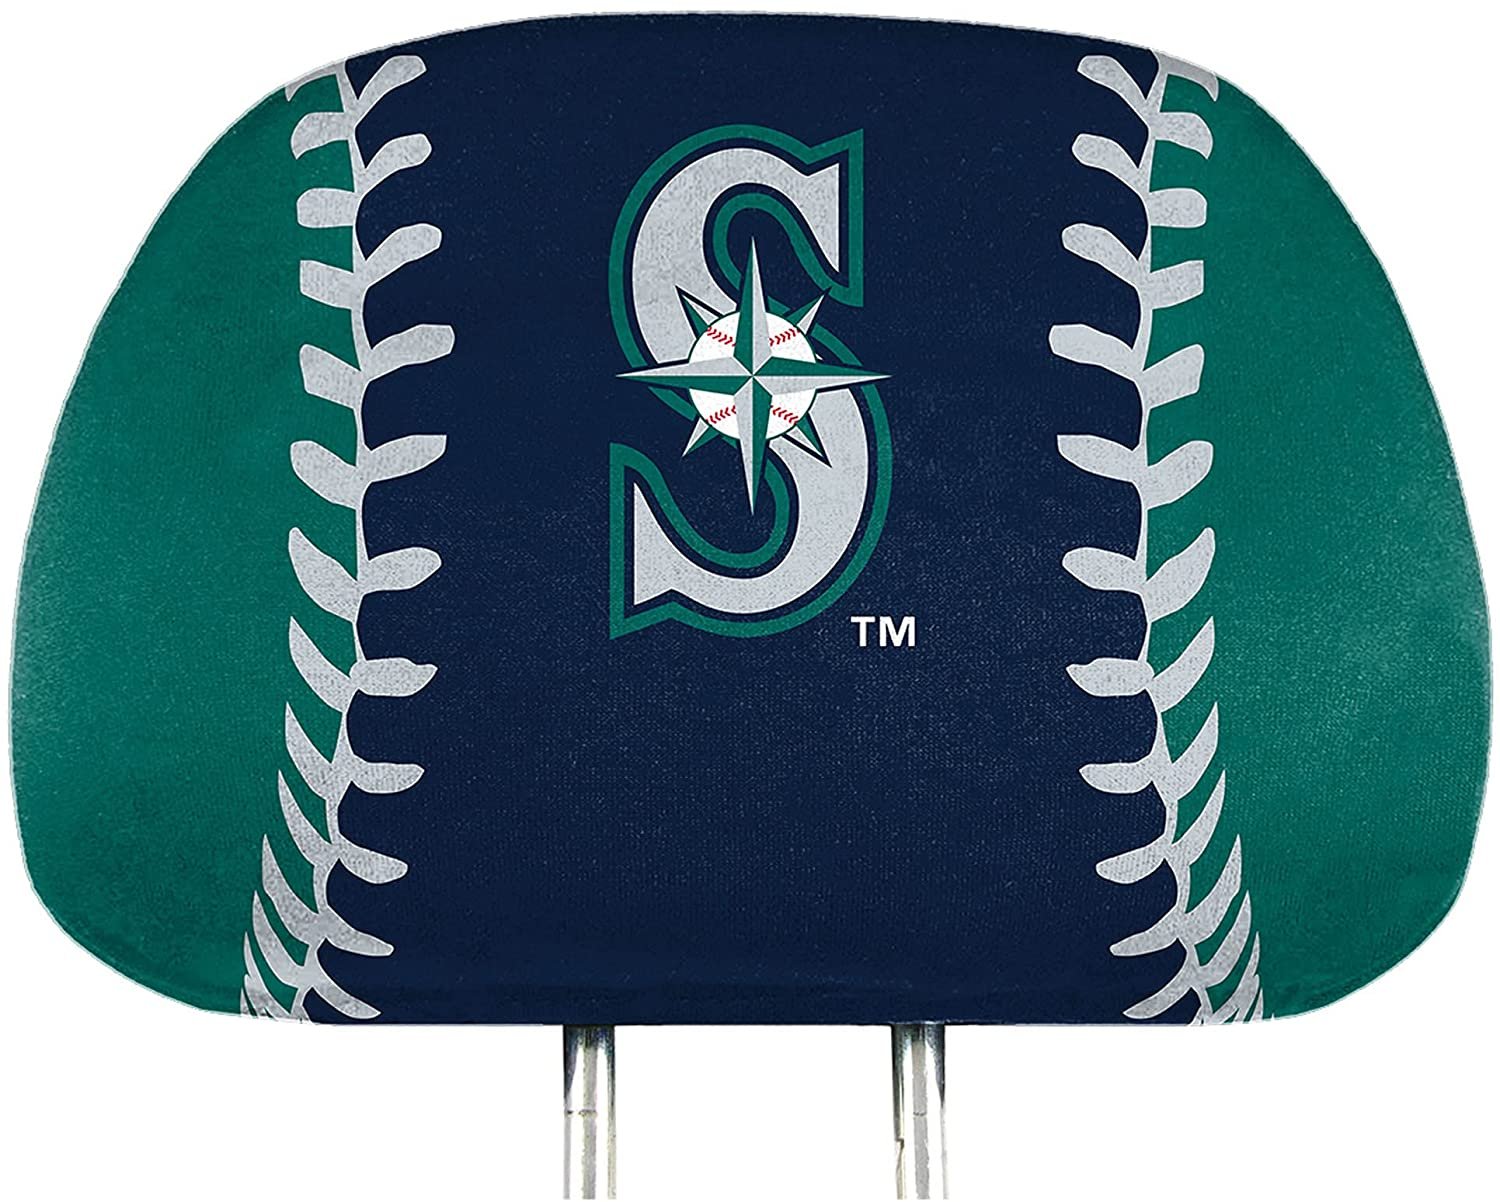 Seattle Mariners Premium Pair of Auto Head Rest Covers, Full Color Printed, Elastic, 10x14 Inch